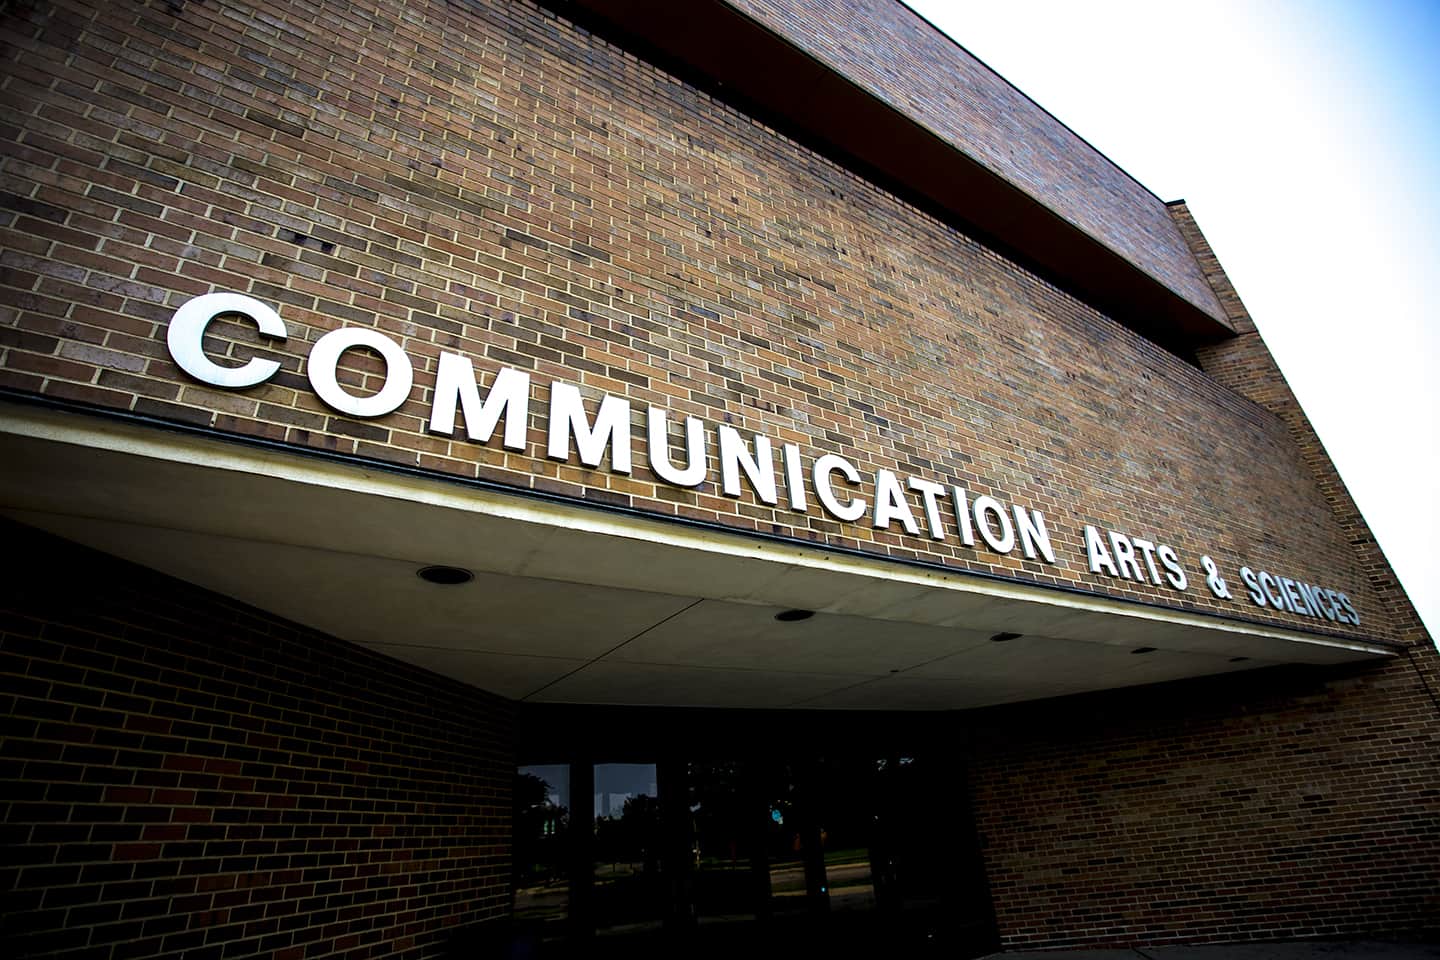 Communication Arts and Sciences building